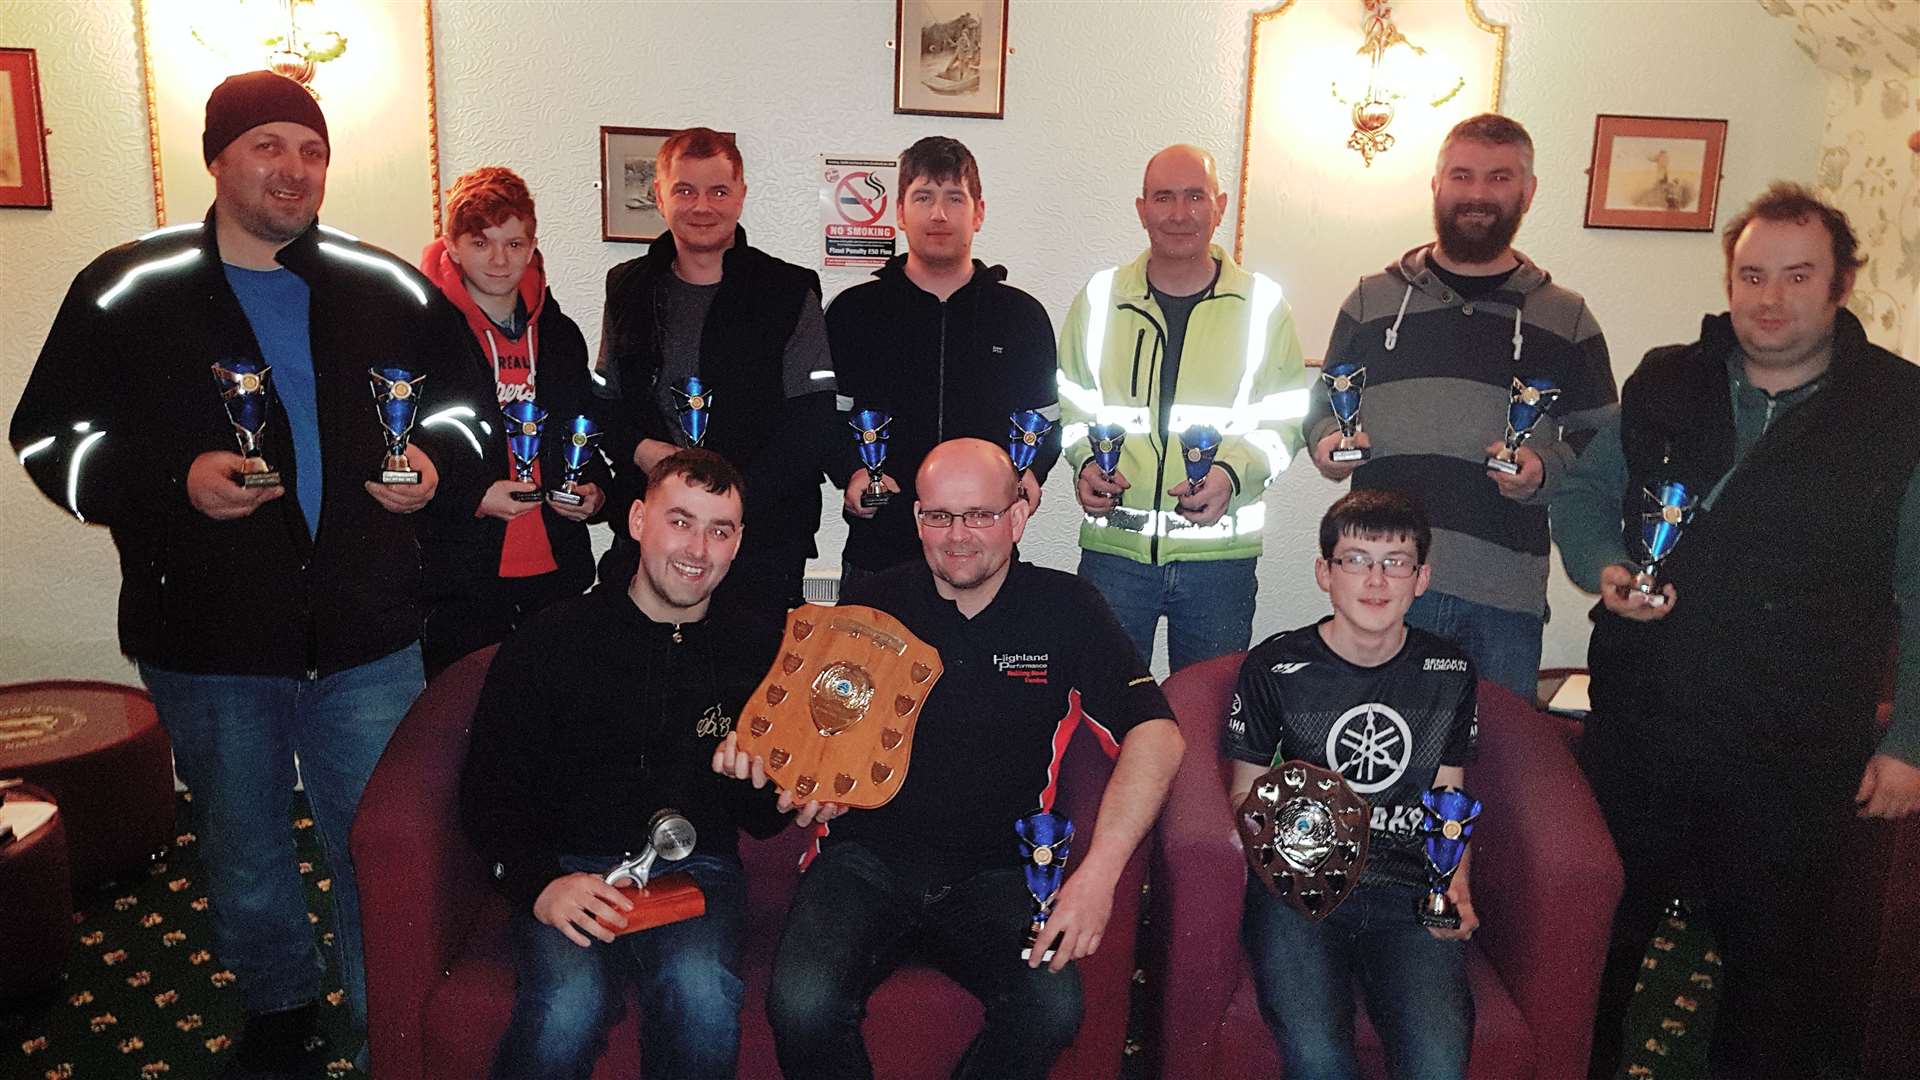 Peter Campbell (front centre) receives the championship shield from outgoing 2019 chairman Craig Manson at the Caithness Autocross Club’s AGM held in Watten – with son Kian Campbell, junior champion, alongside as other club members look on.